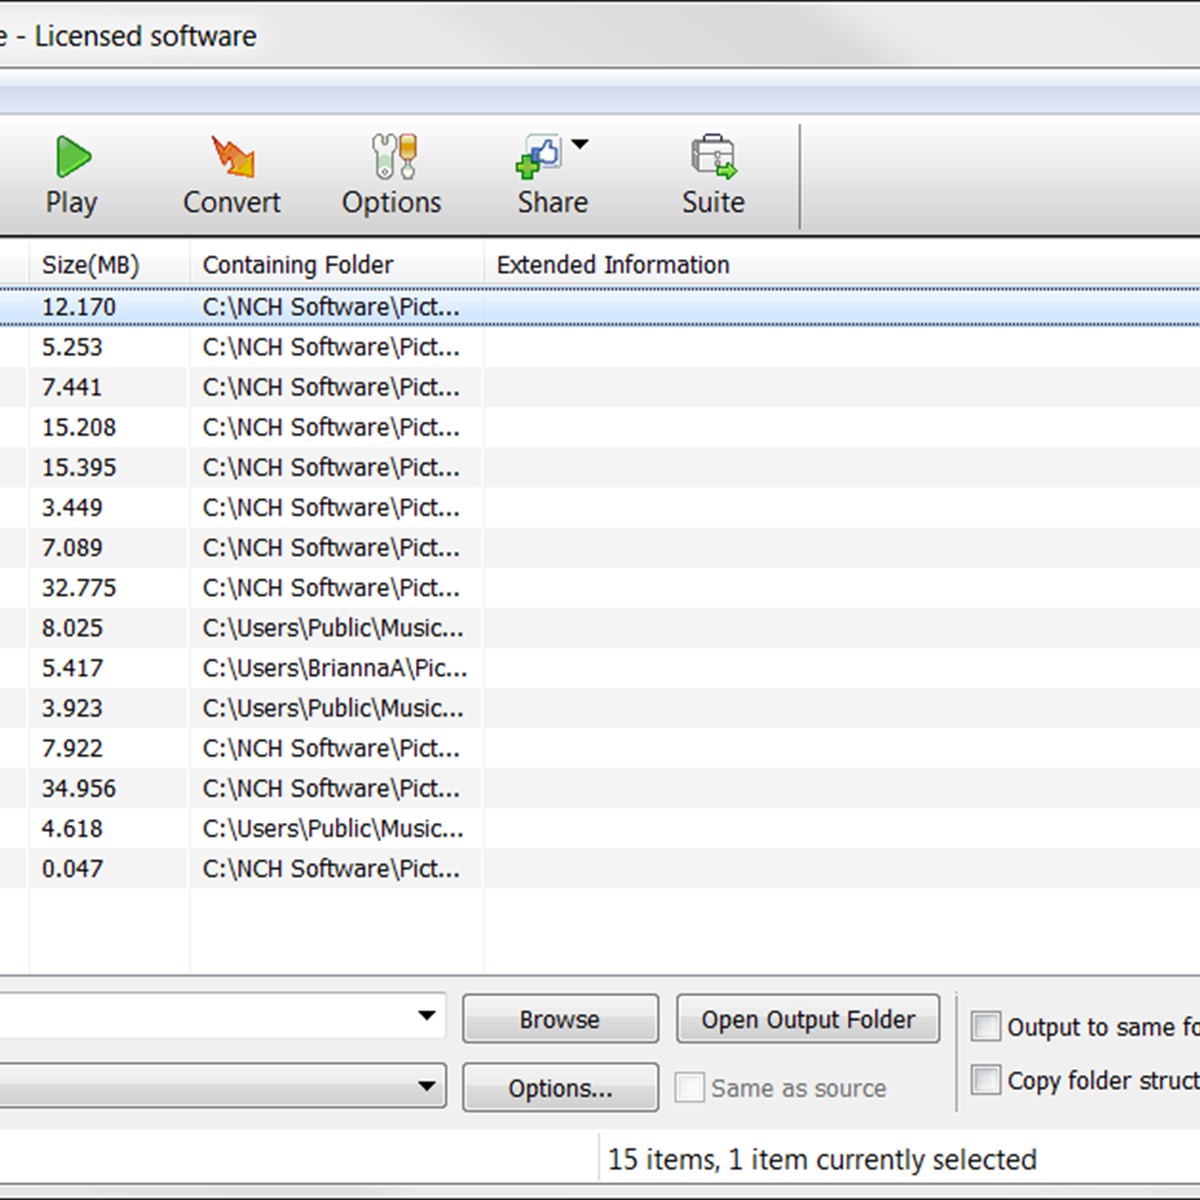 download nch switch sound file converter plus 4.47